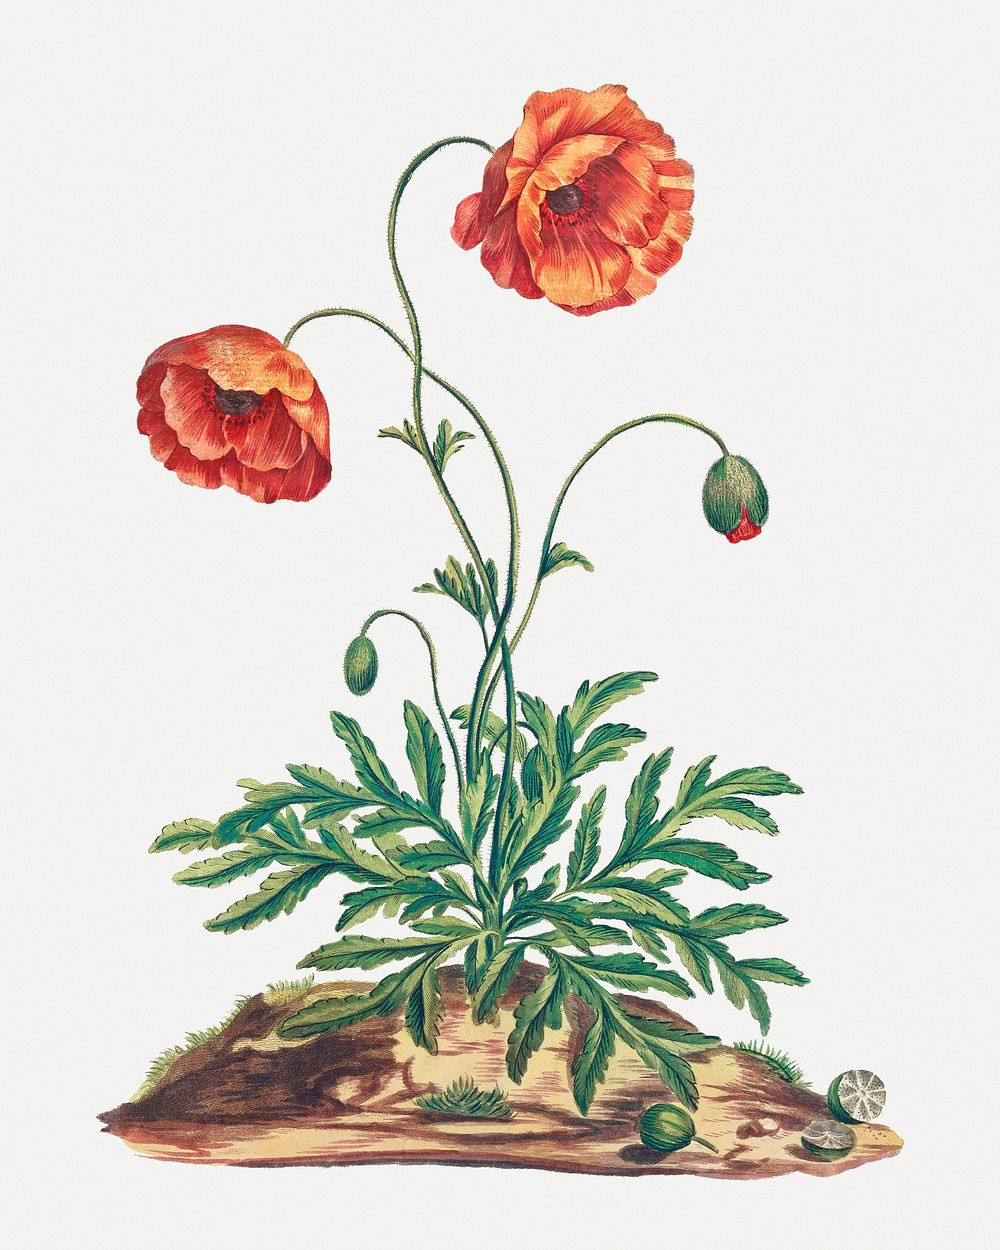 Poppy psd vintage floral art print, remixed from artworks by John Edwards